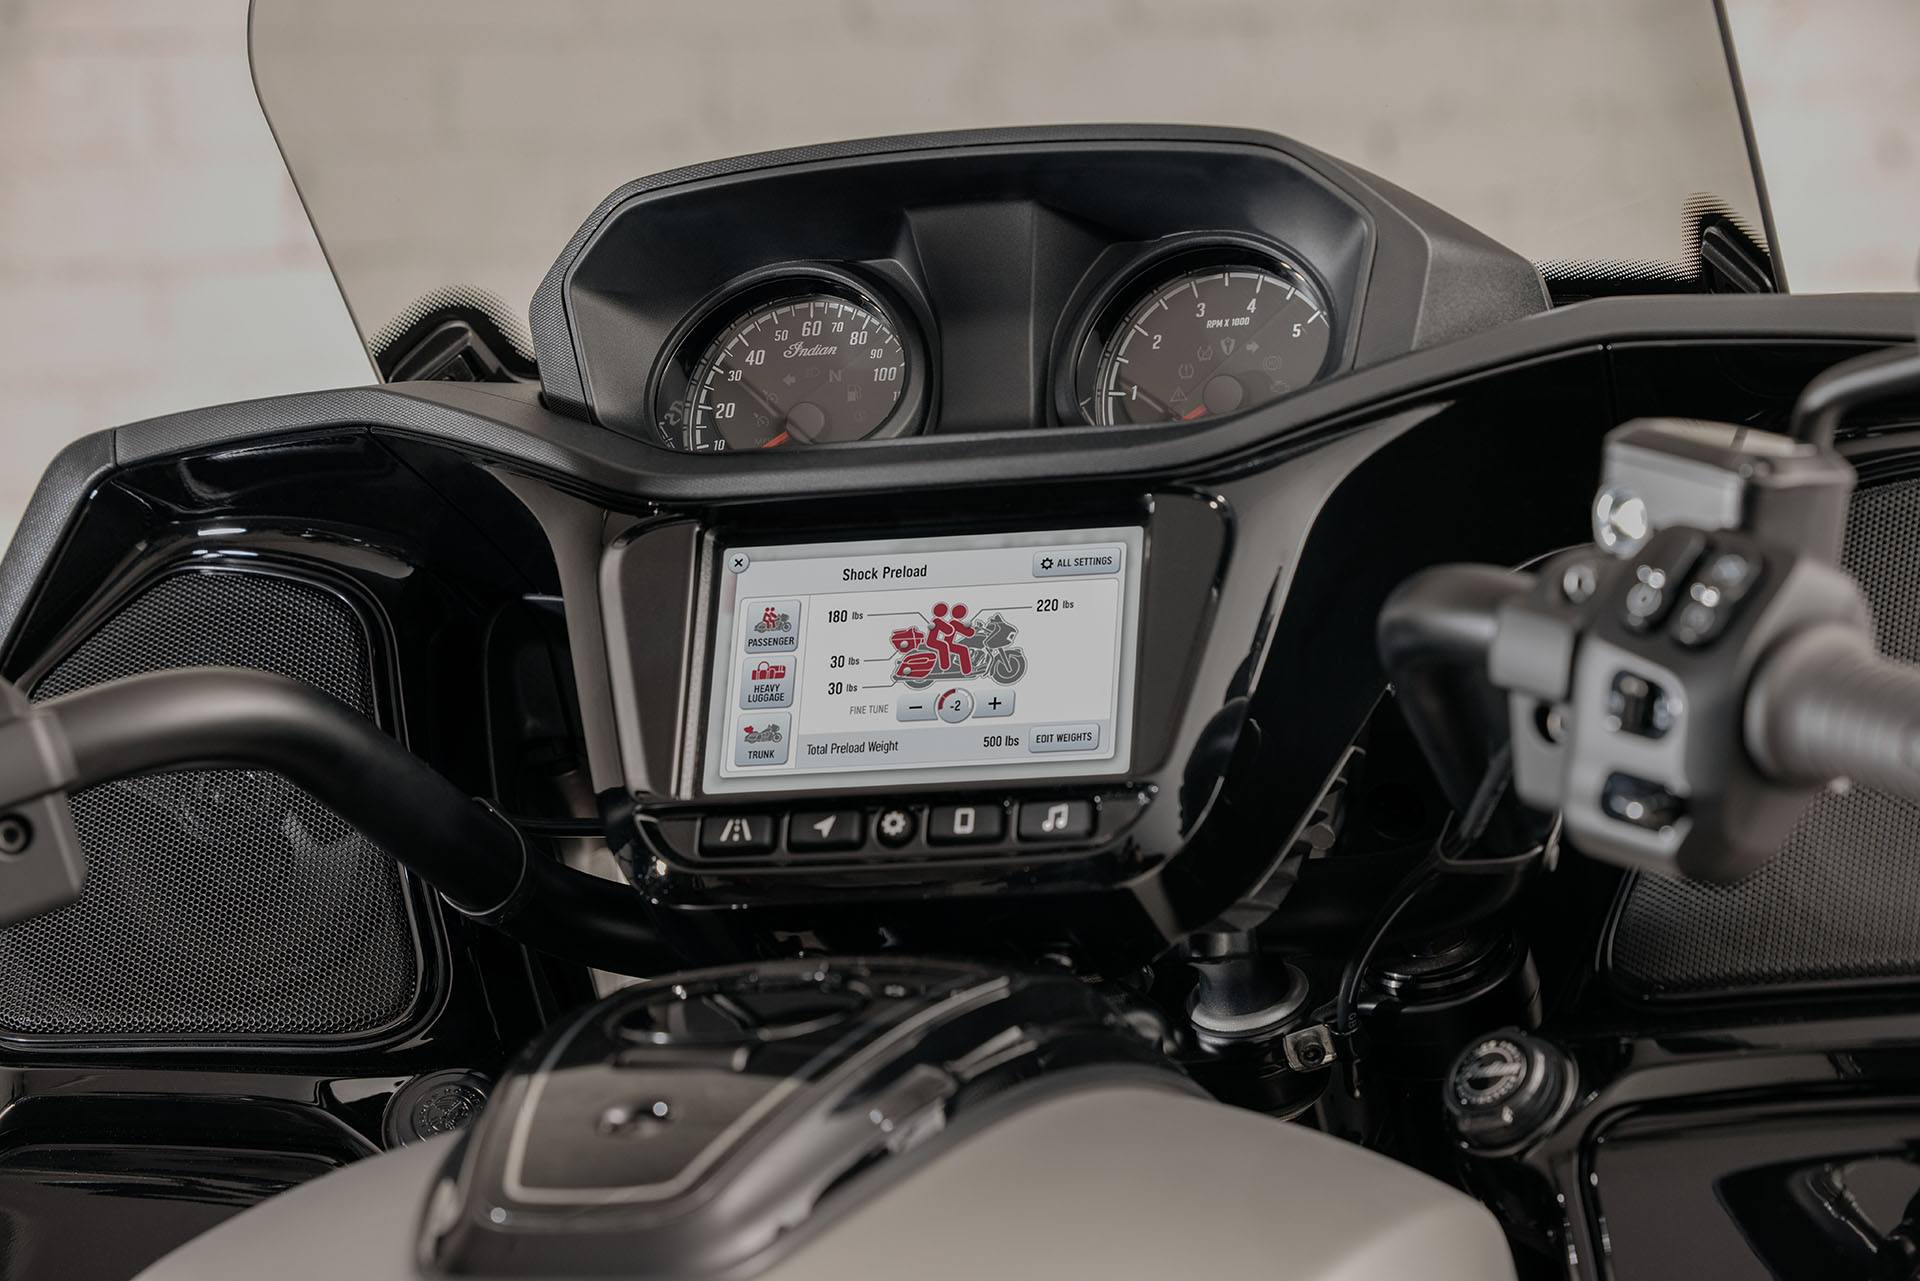 2022 Indian Motorcycle Pursuit® Dark Horse® with Premium Package in Elkhart, Indiana - Photo 11